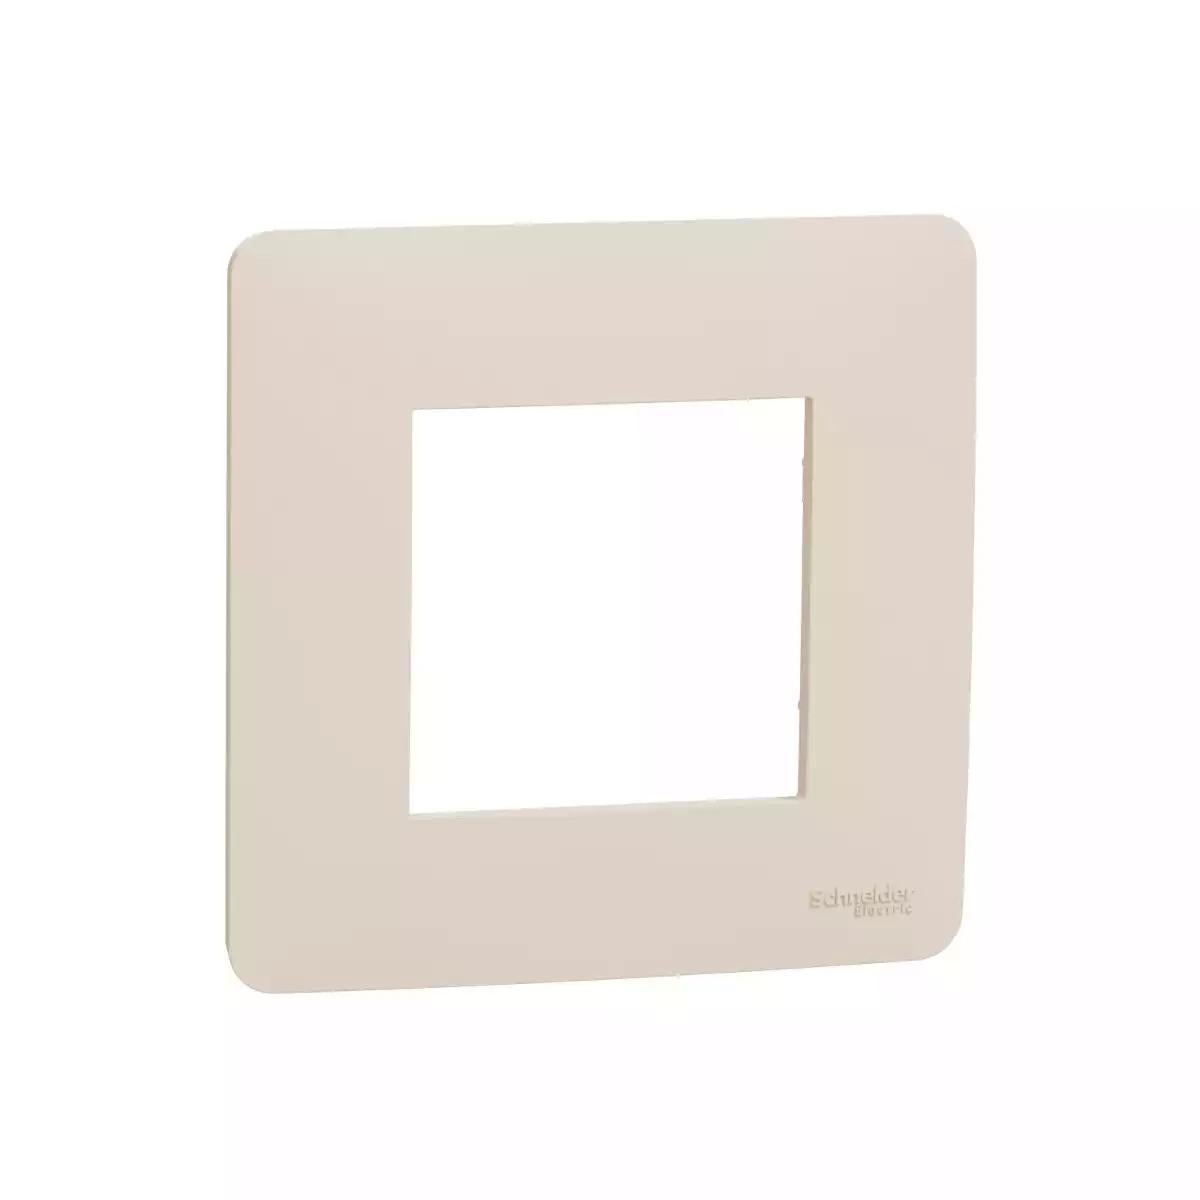 New Unica - cover frame - 1 gang - 1 x 2 modules - beige